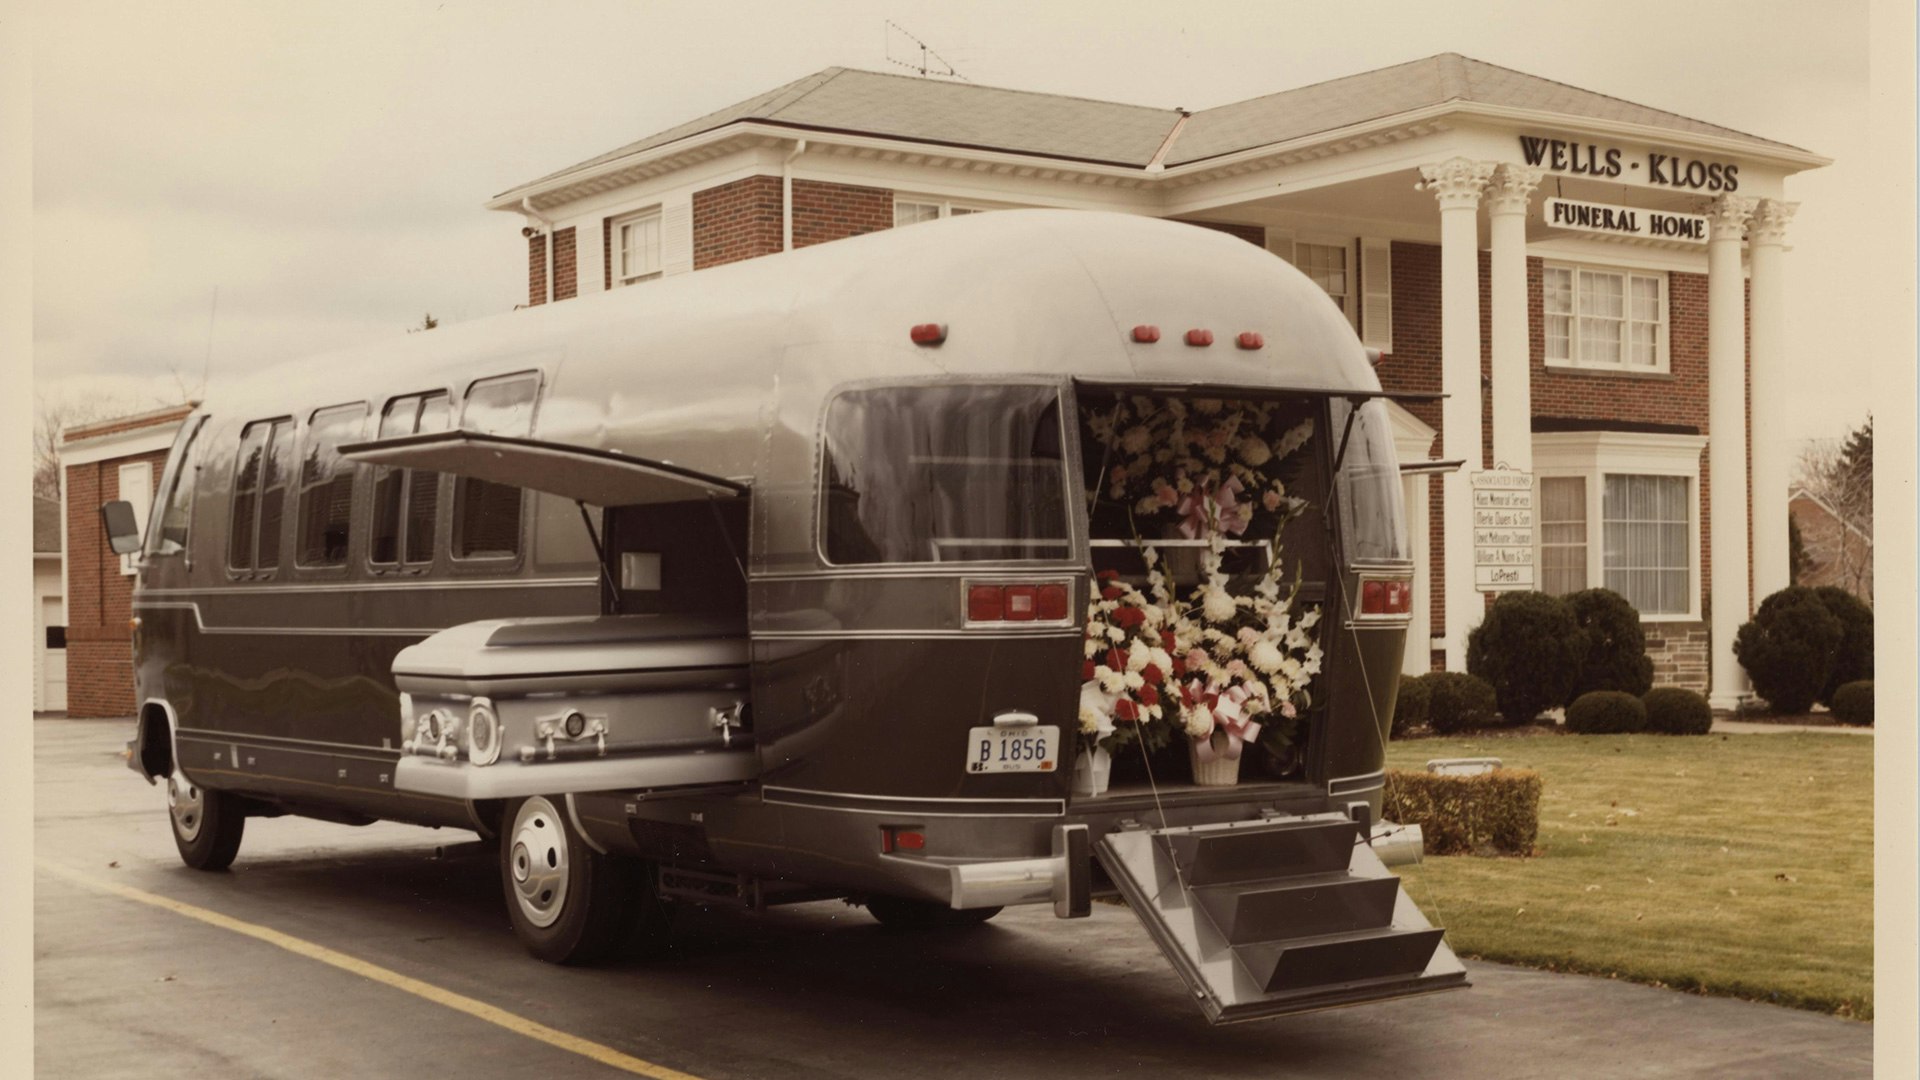 The Funeral Coach was produced from 1981-1991, and a rare 1984 Funeral Coach model will be on display in Airstream’s new Heritage Center.